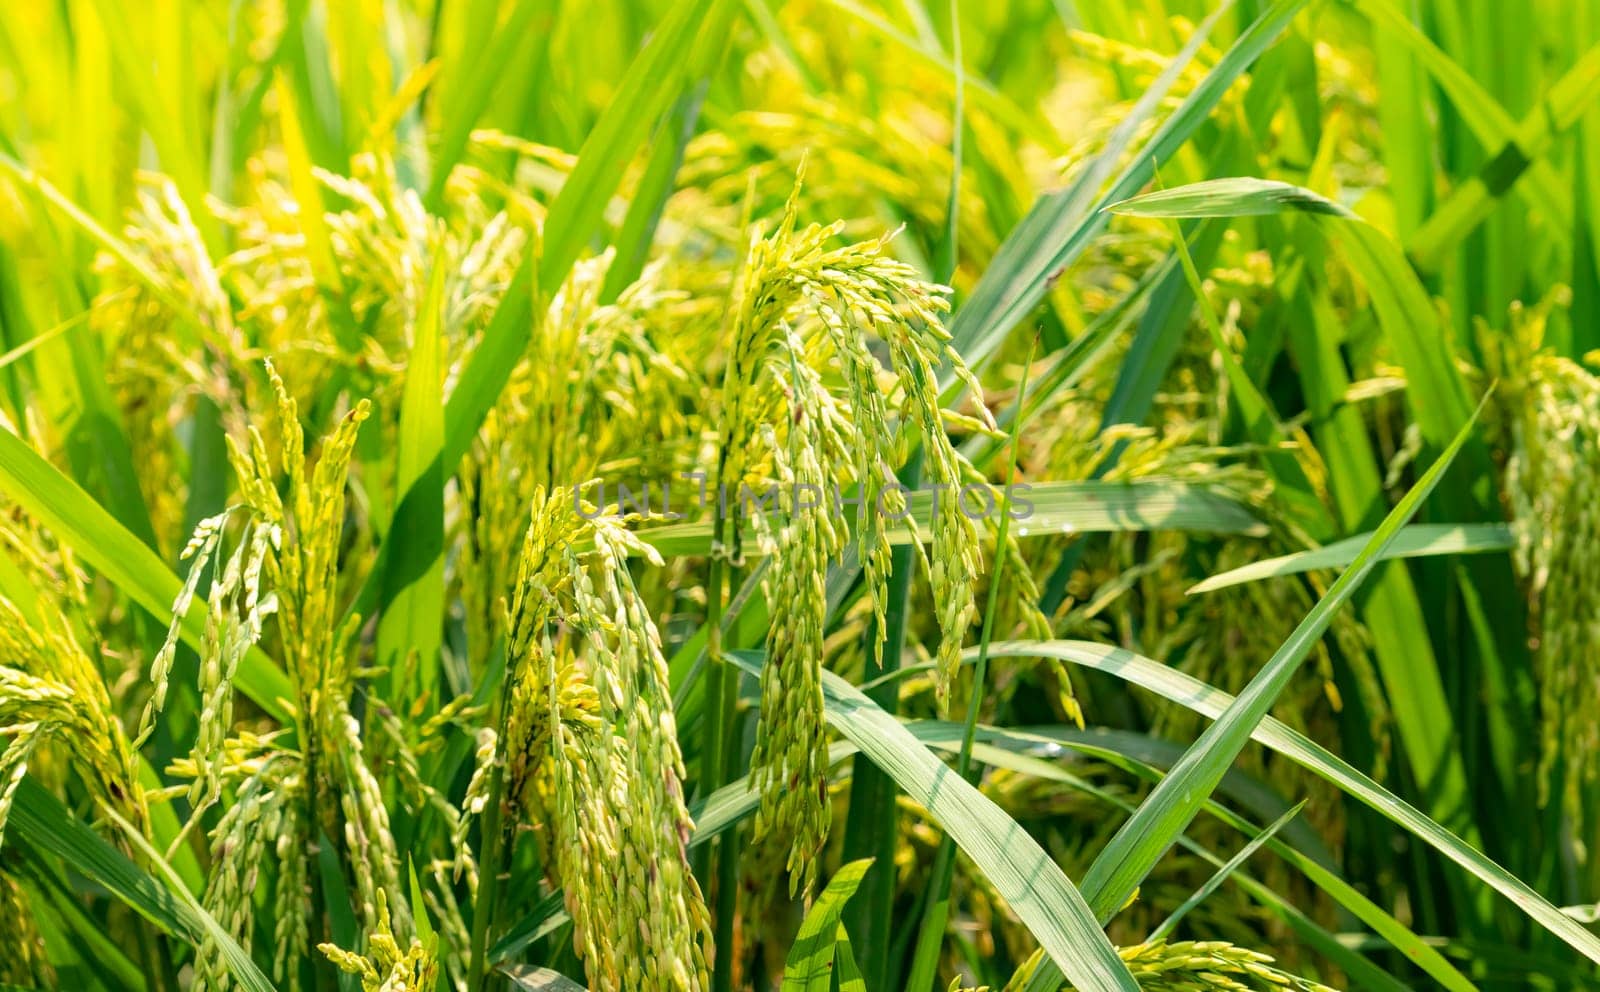 Green rice paddy field. Rice plantation. Organic jasmine rice farm in asia. Rice growing agriculture. Beautiful nature of farmland. Asian food. Paddy field wait for harvest. Plant cultivation.